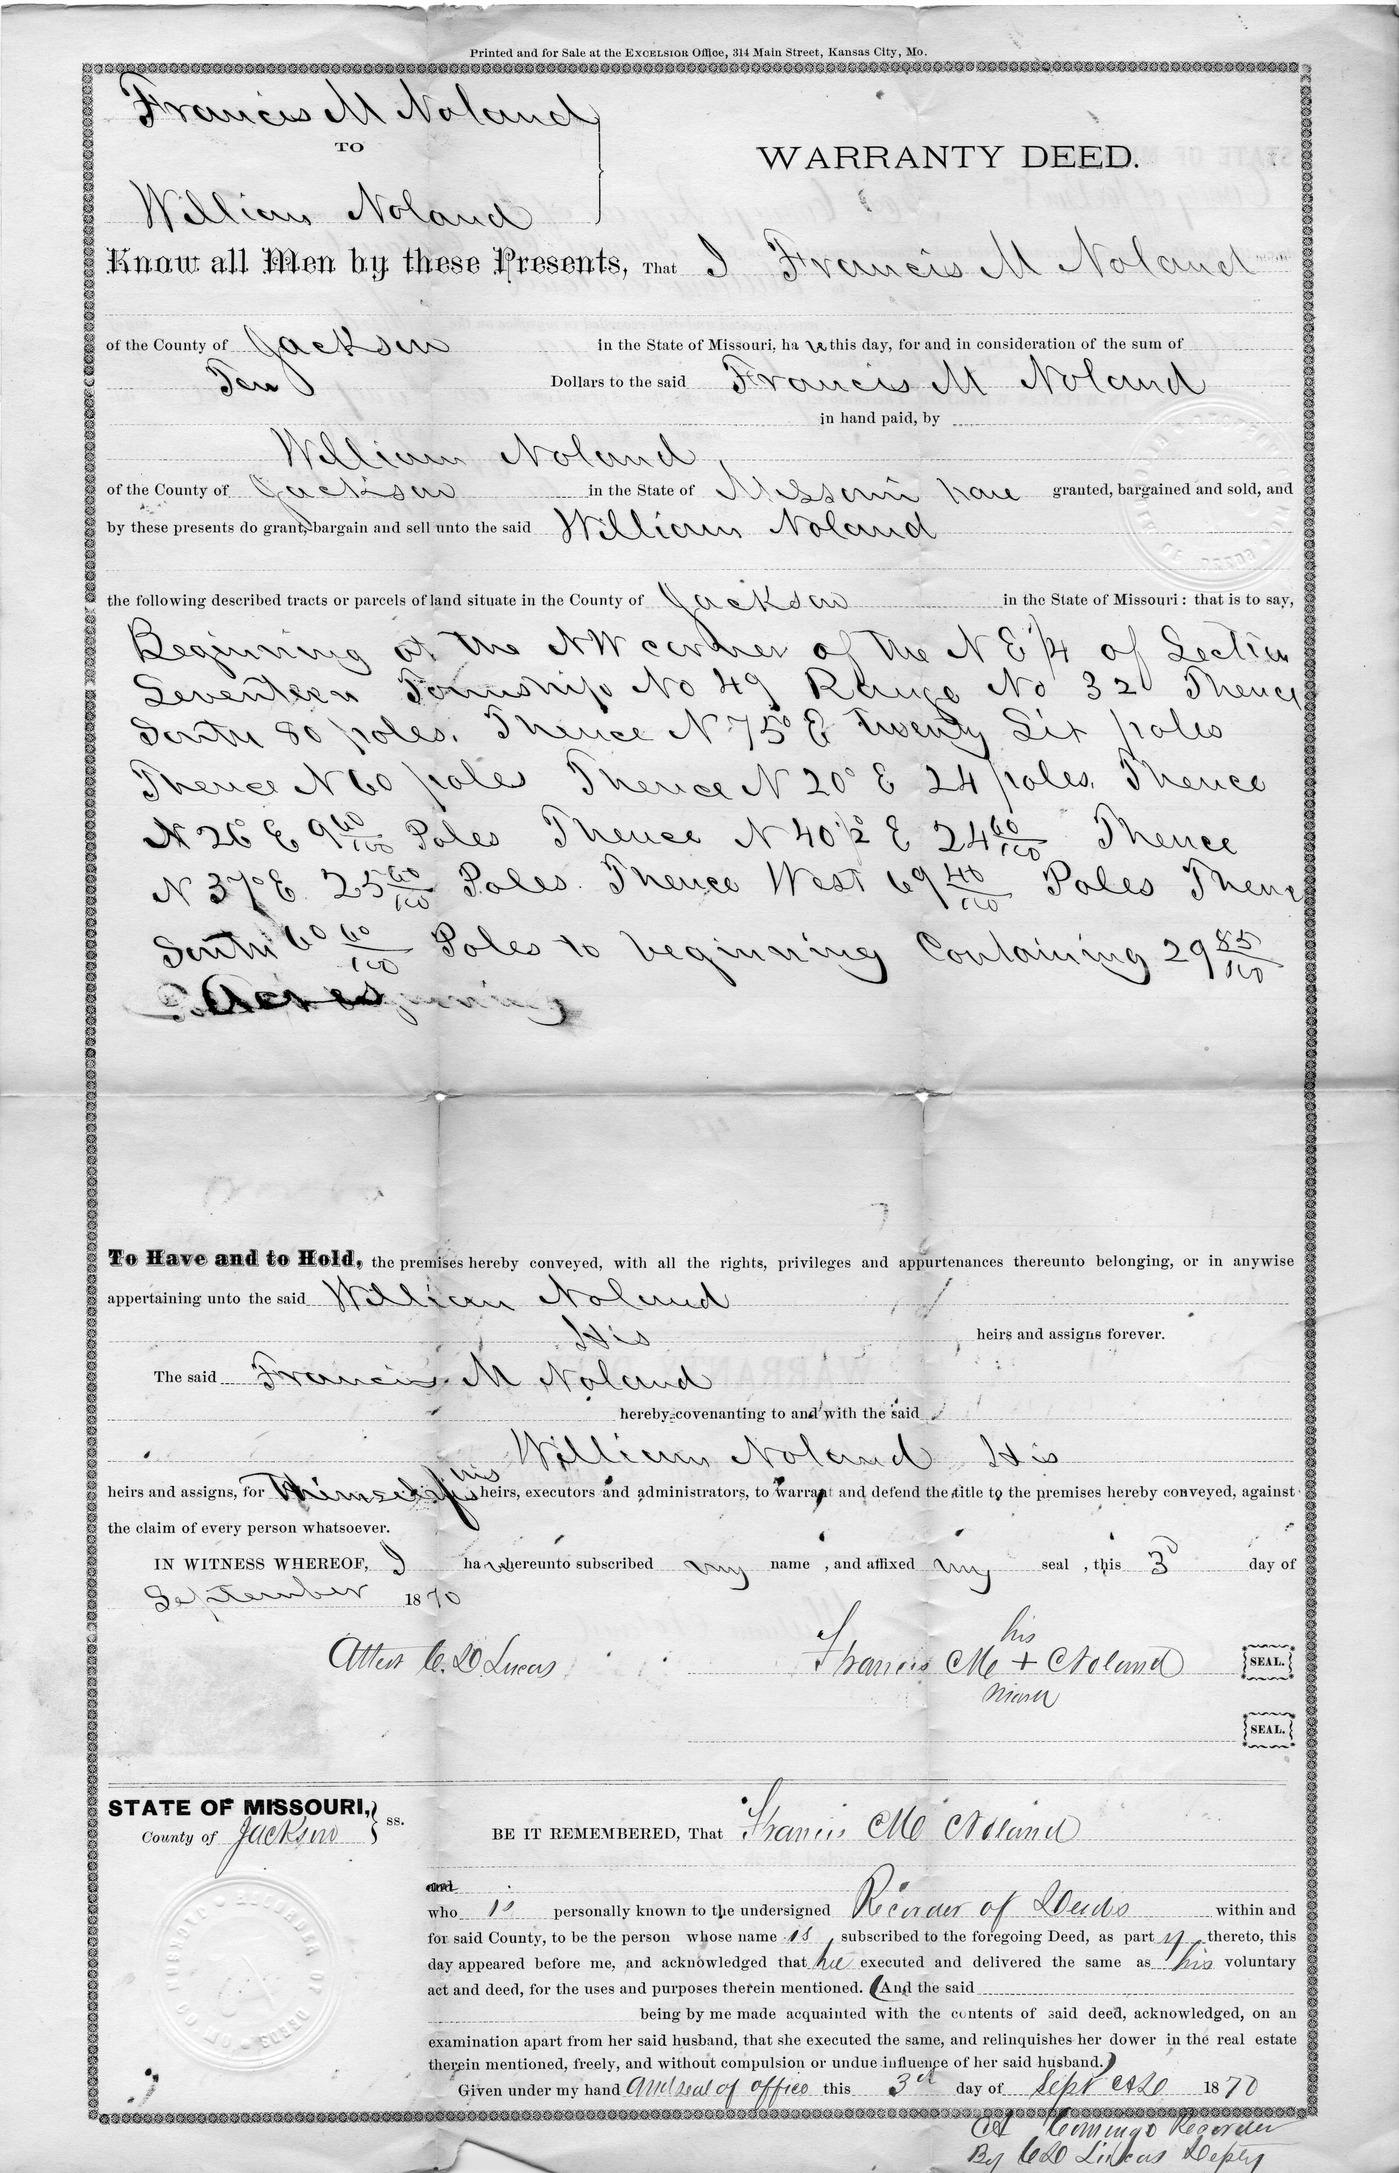 Warranty Deed from Francis M. Noland to William Noland